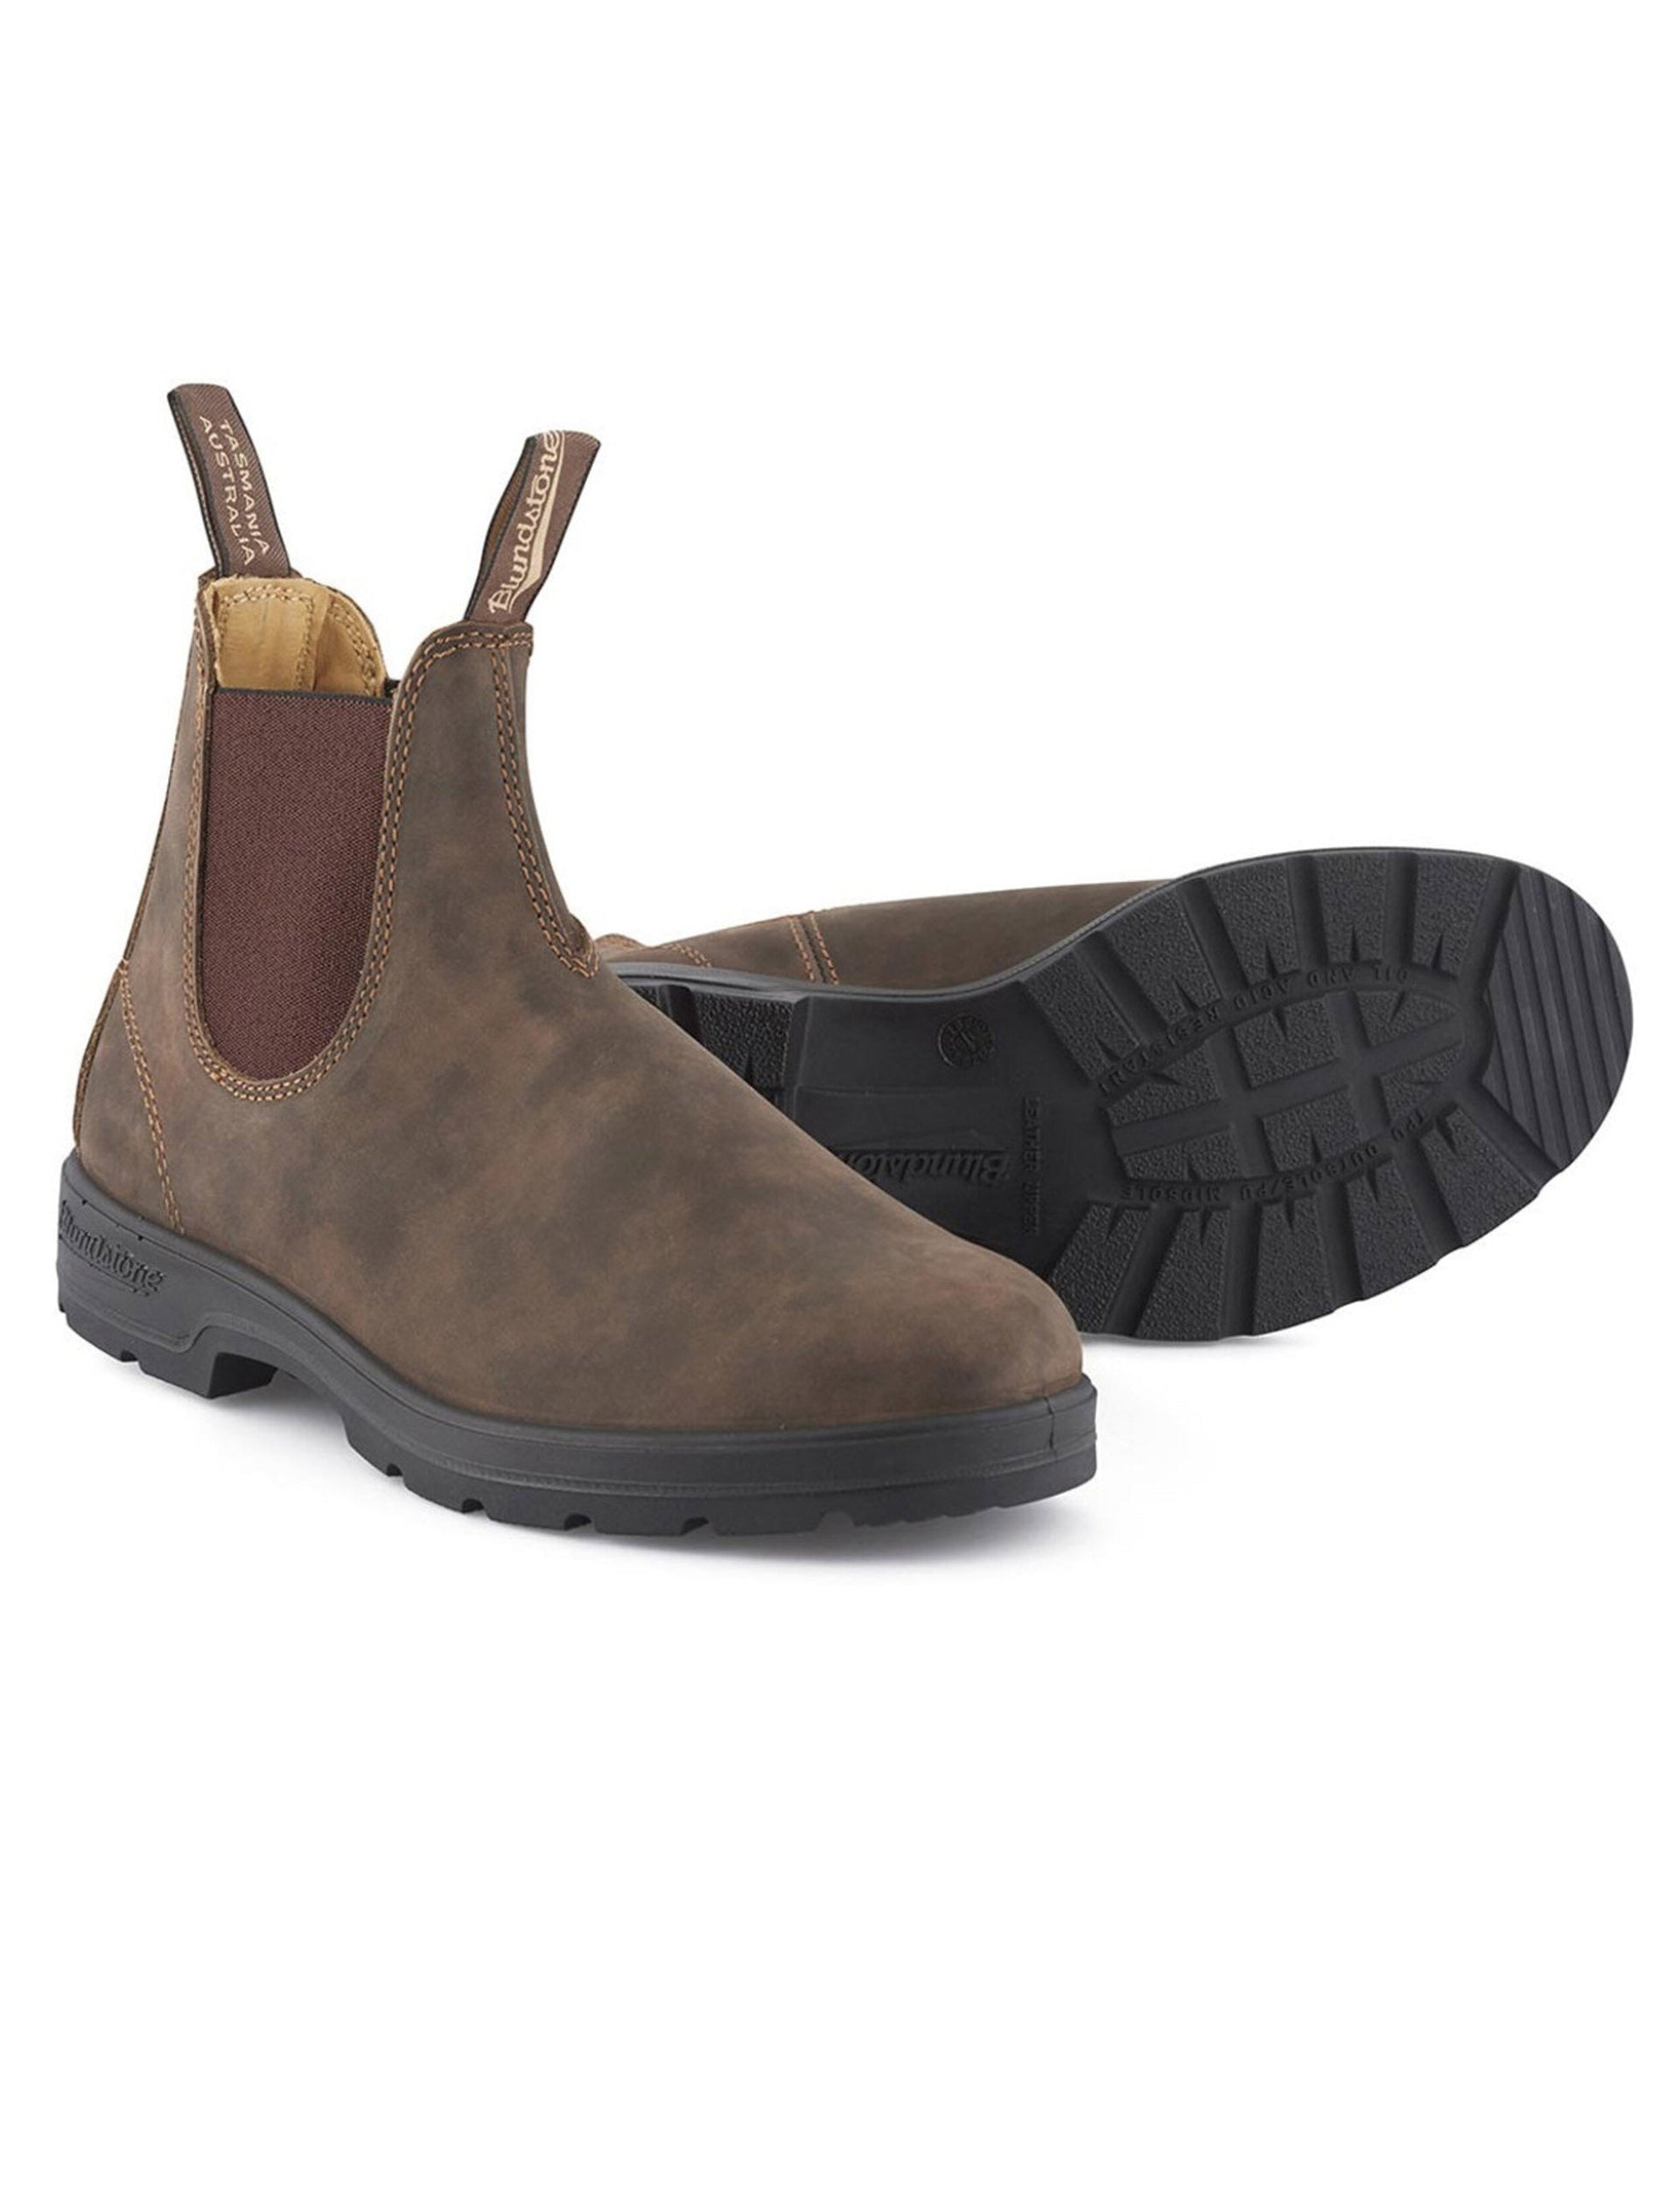 BLUNDSTONE 585 RUSTIC BROWN LEATHER